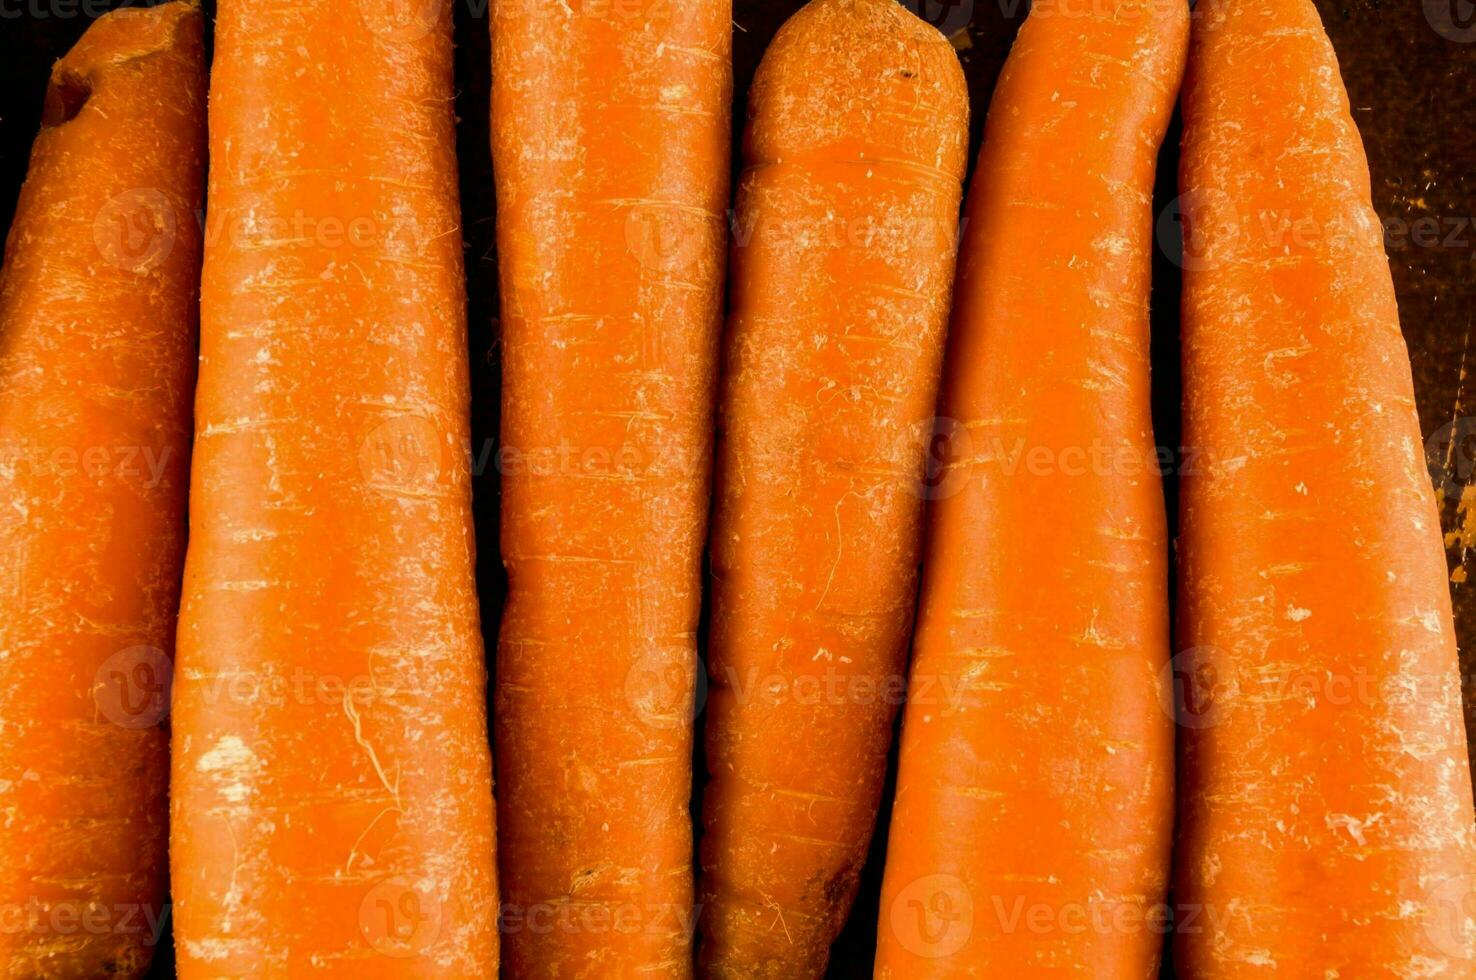 A bunch of carrots photo